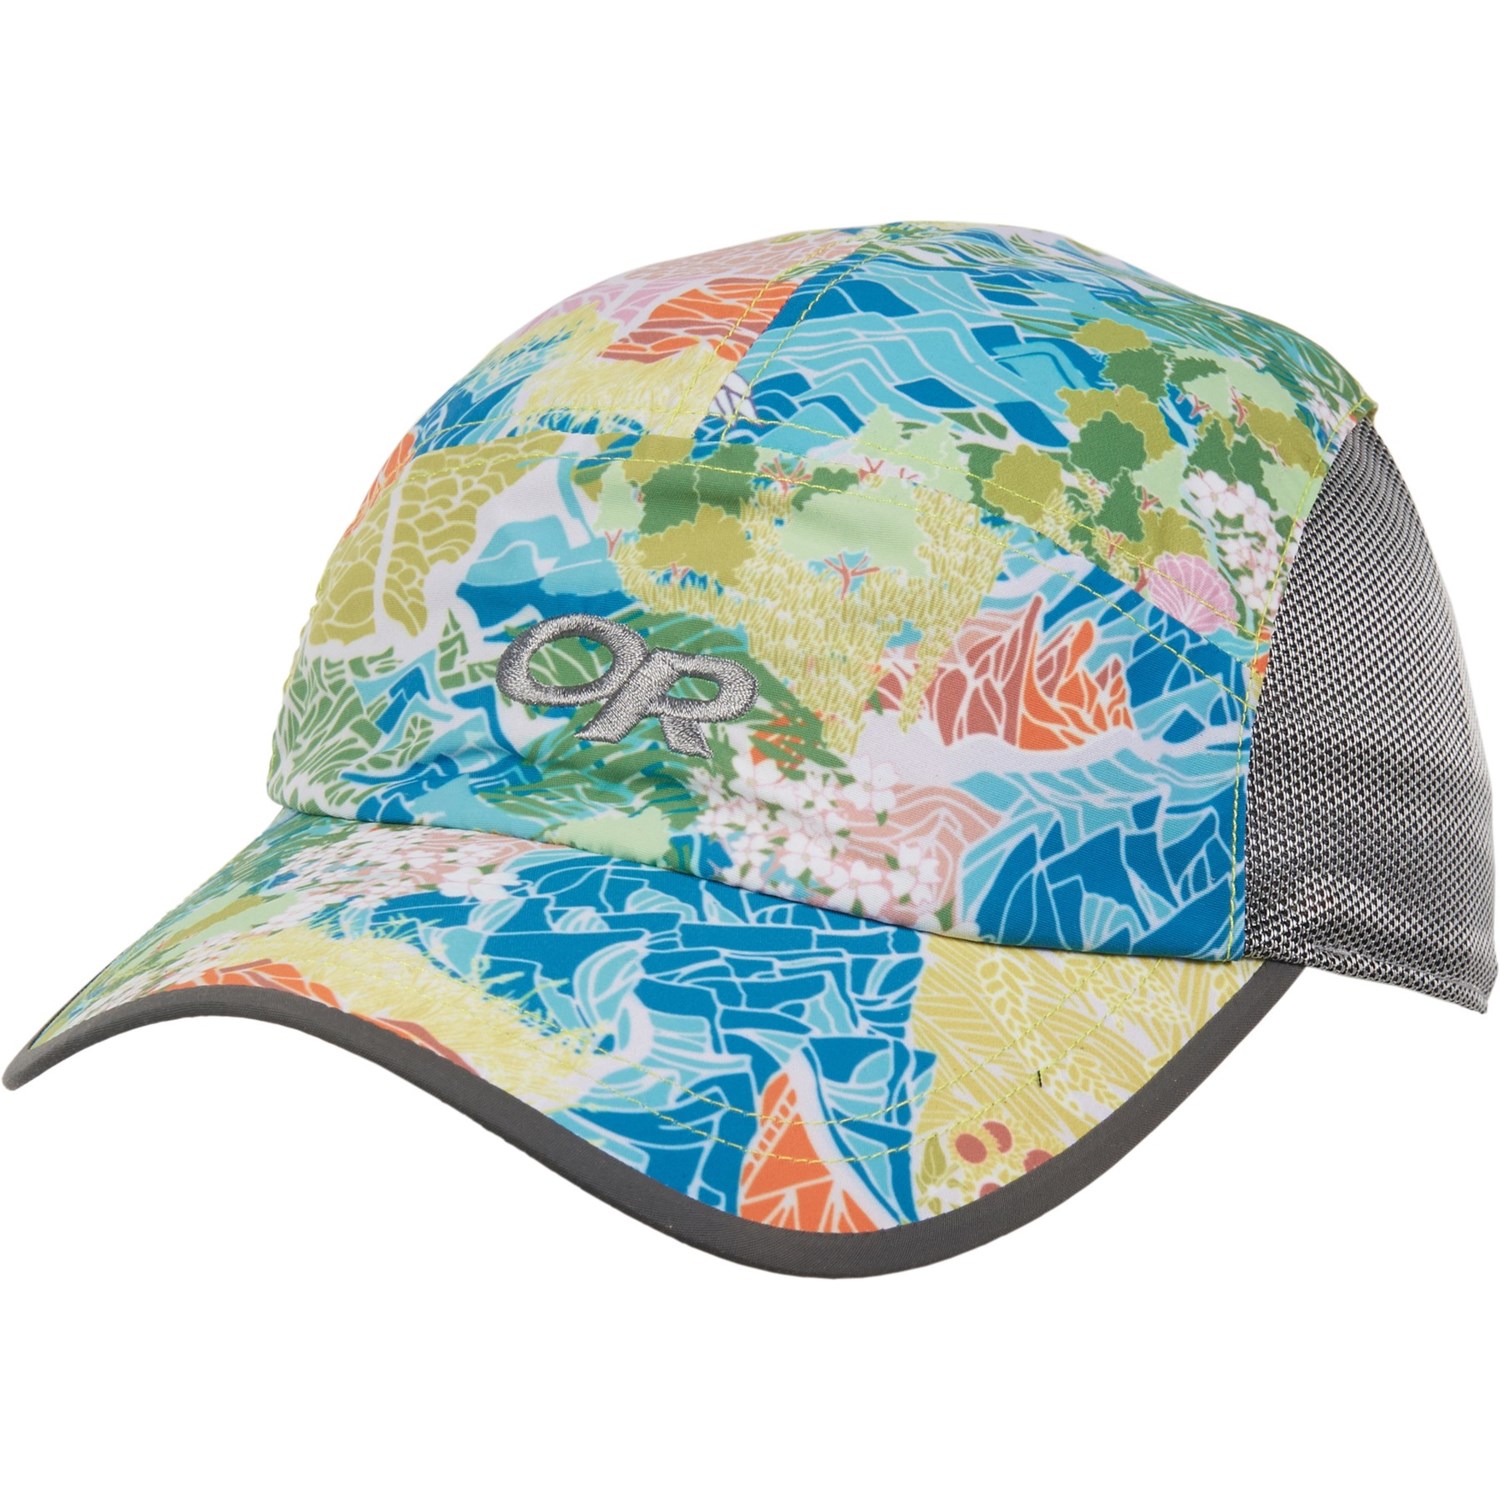 Denali Boonie Sun Hat UV Sun Protection for Outdoors Activities Moisture Wicking Fabric